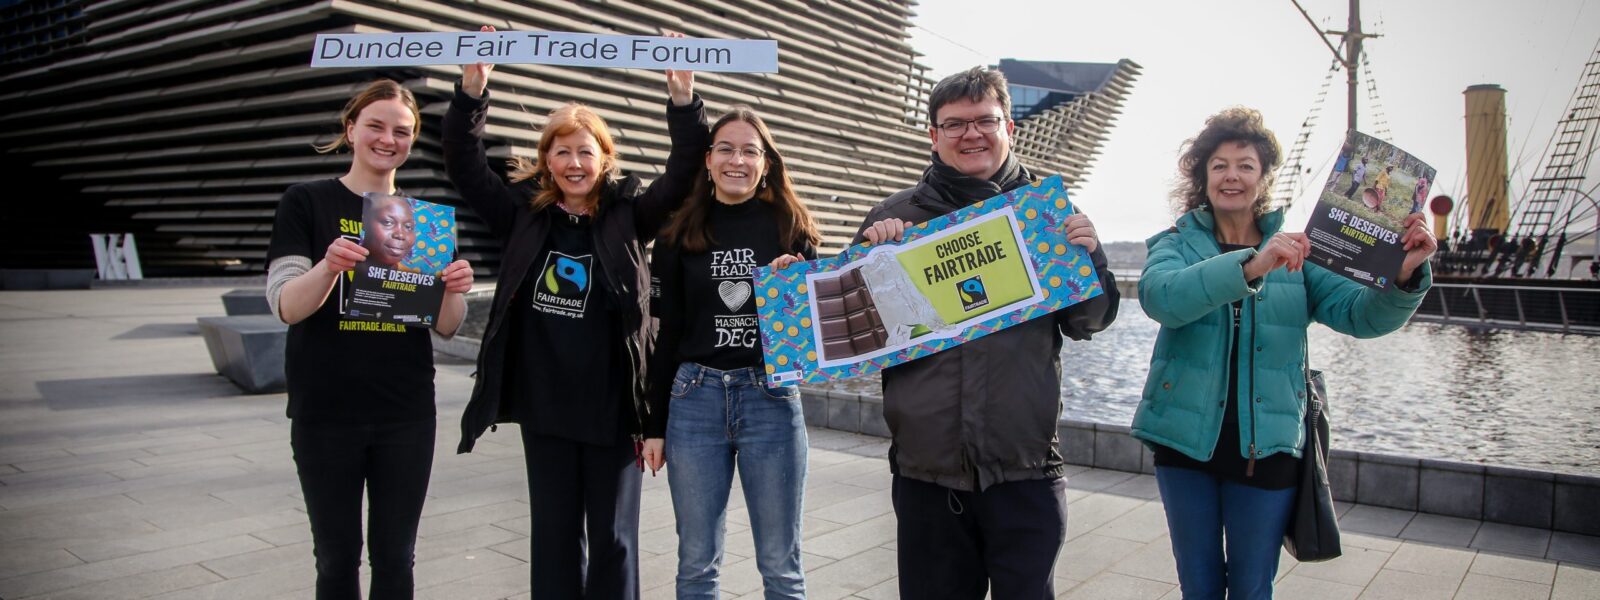 Fair trade campaigners holding fair trade posters